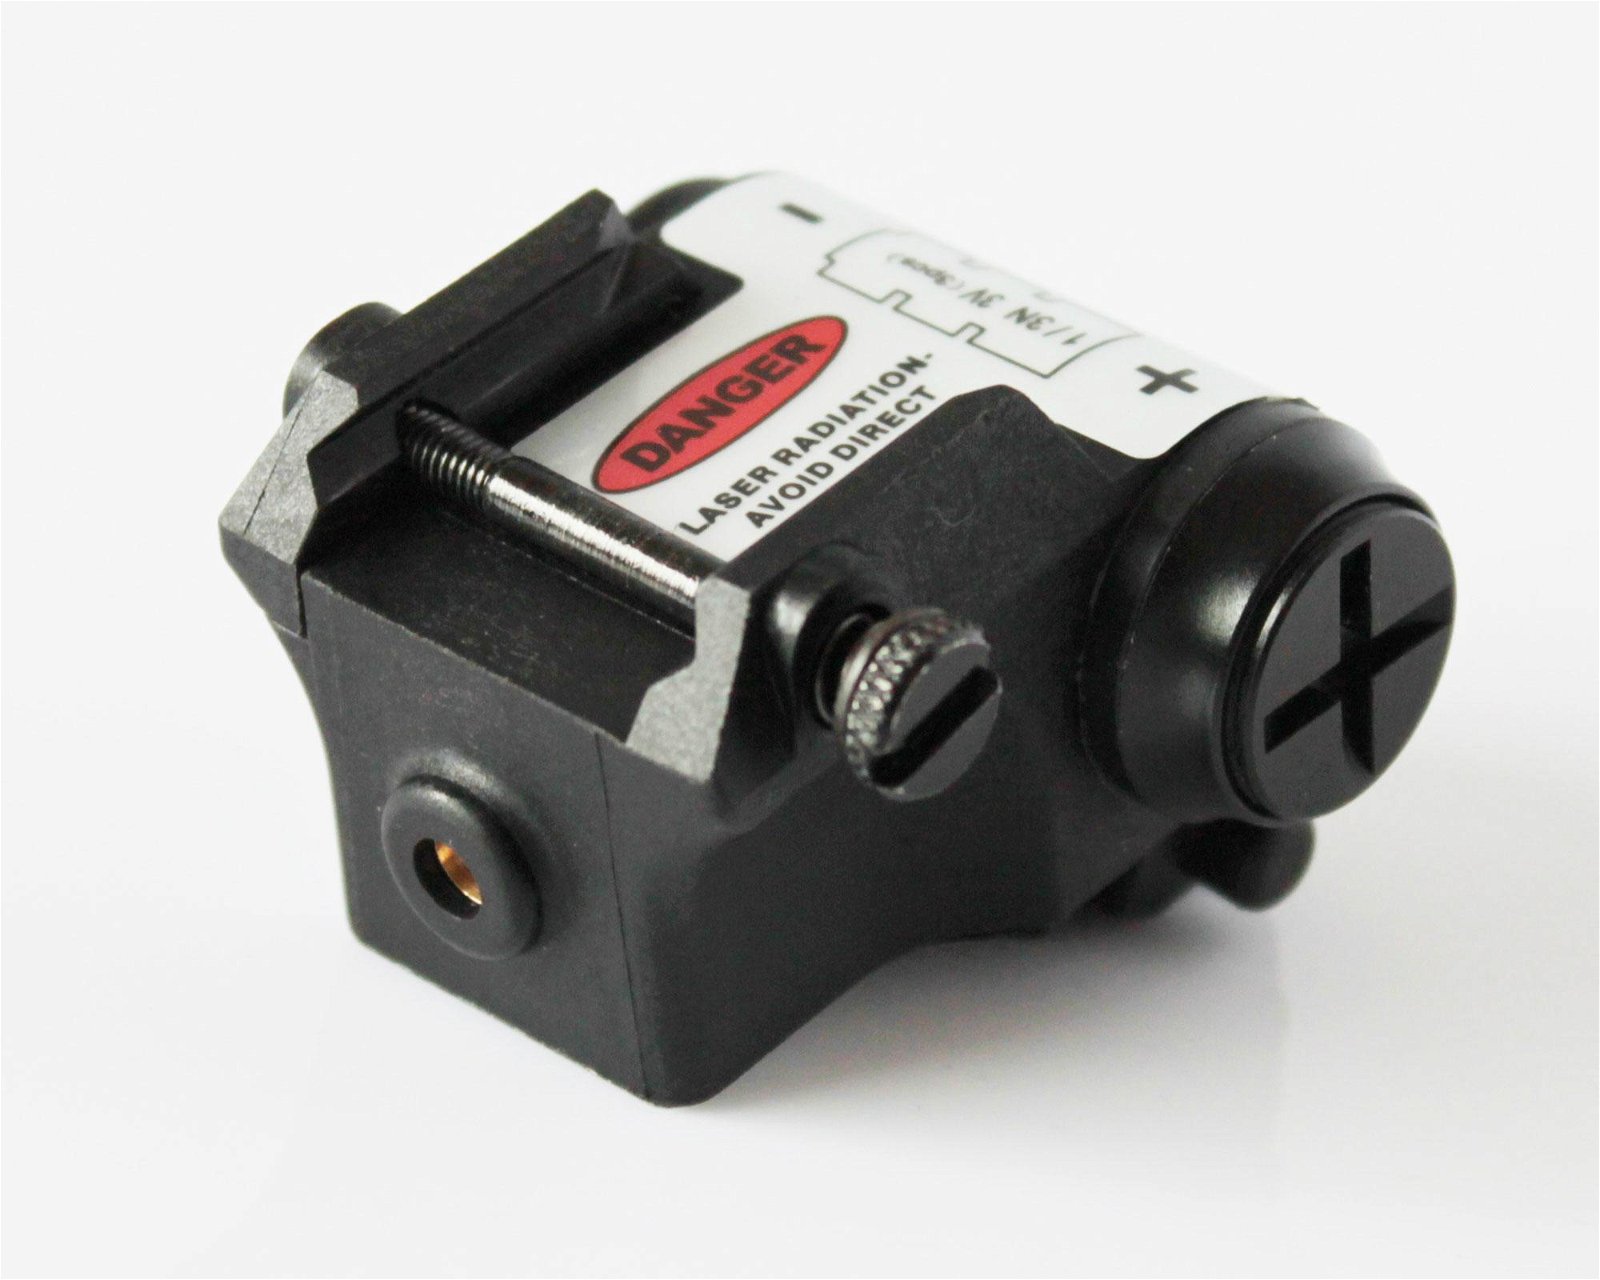 Subcompact green laser sight for pistol 3